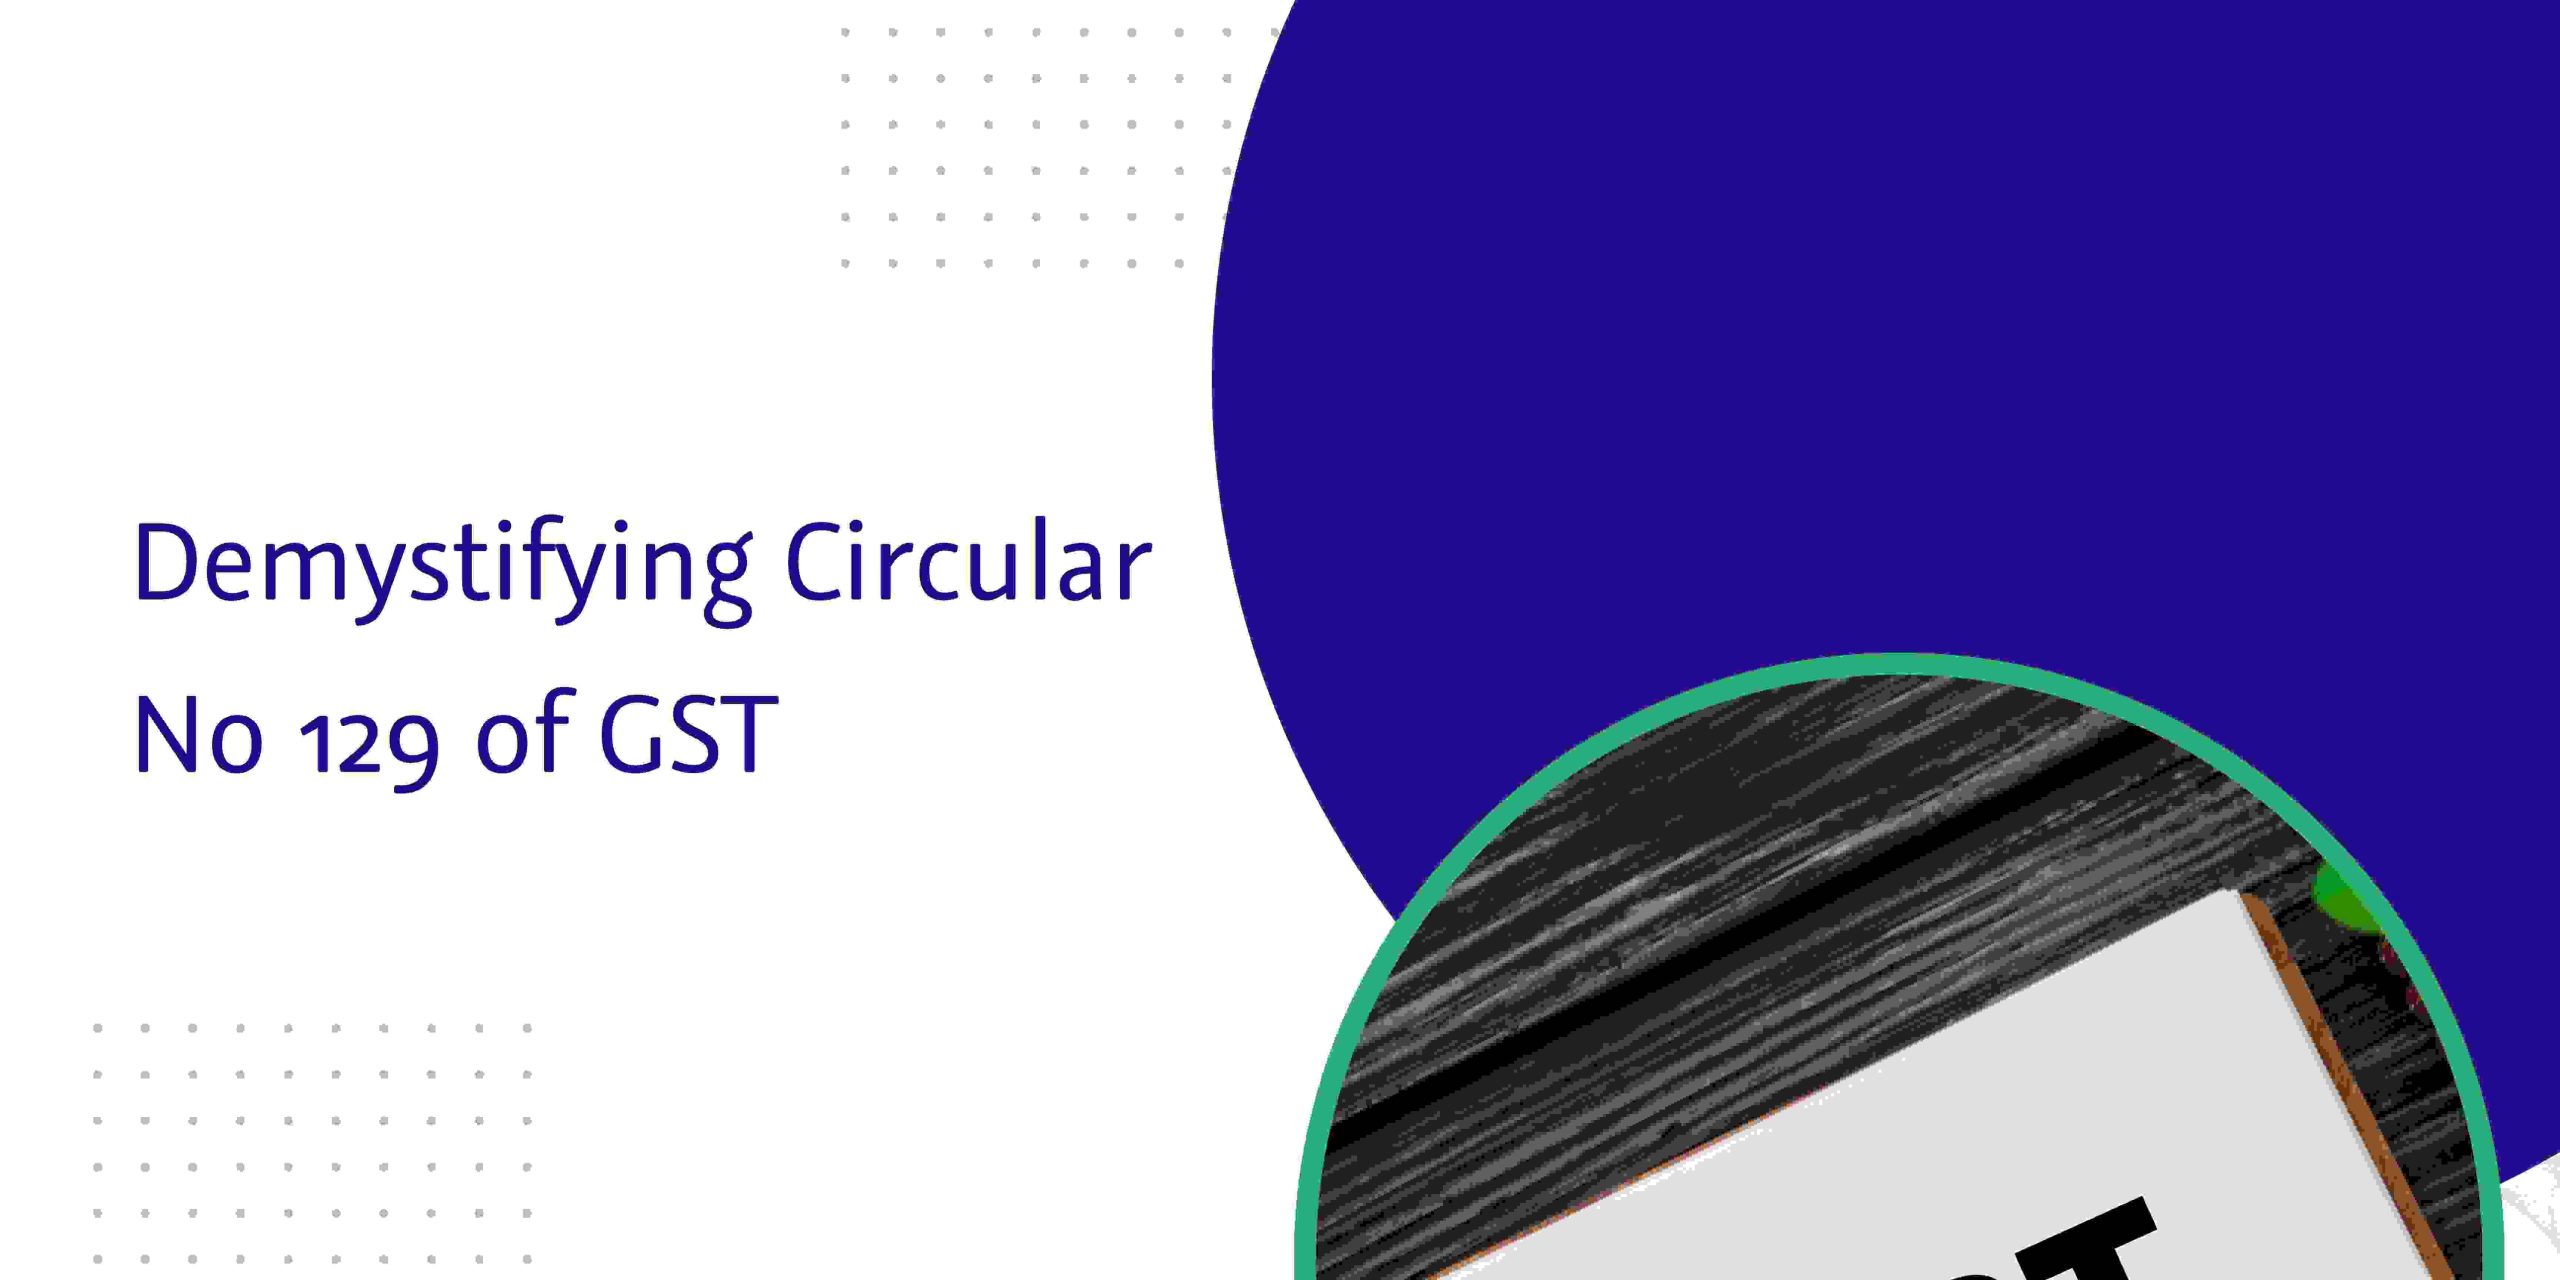 You are currently viewing Demystifying Circular No. 129 of GST